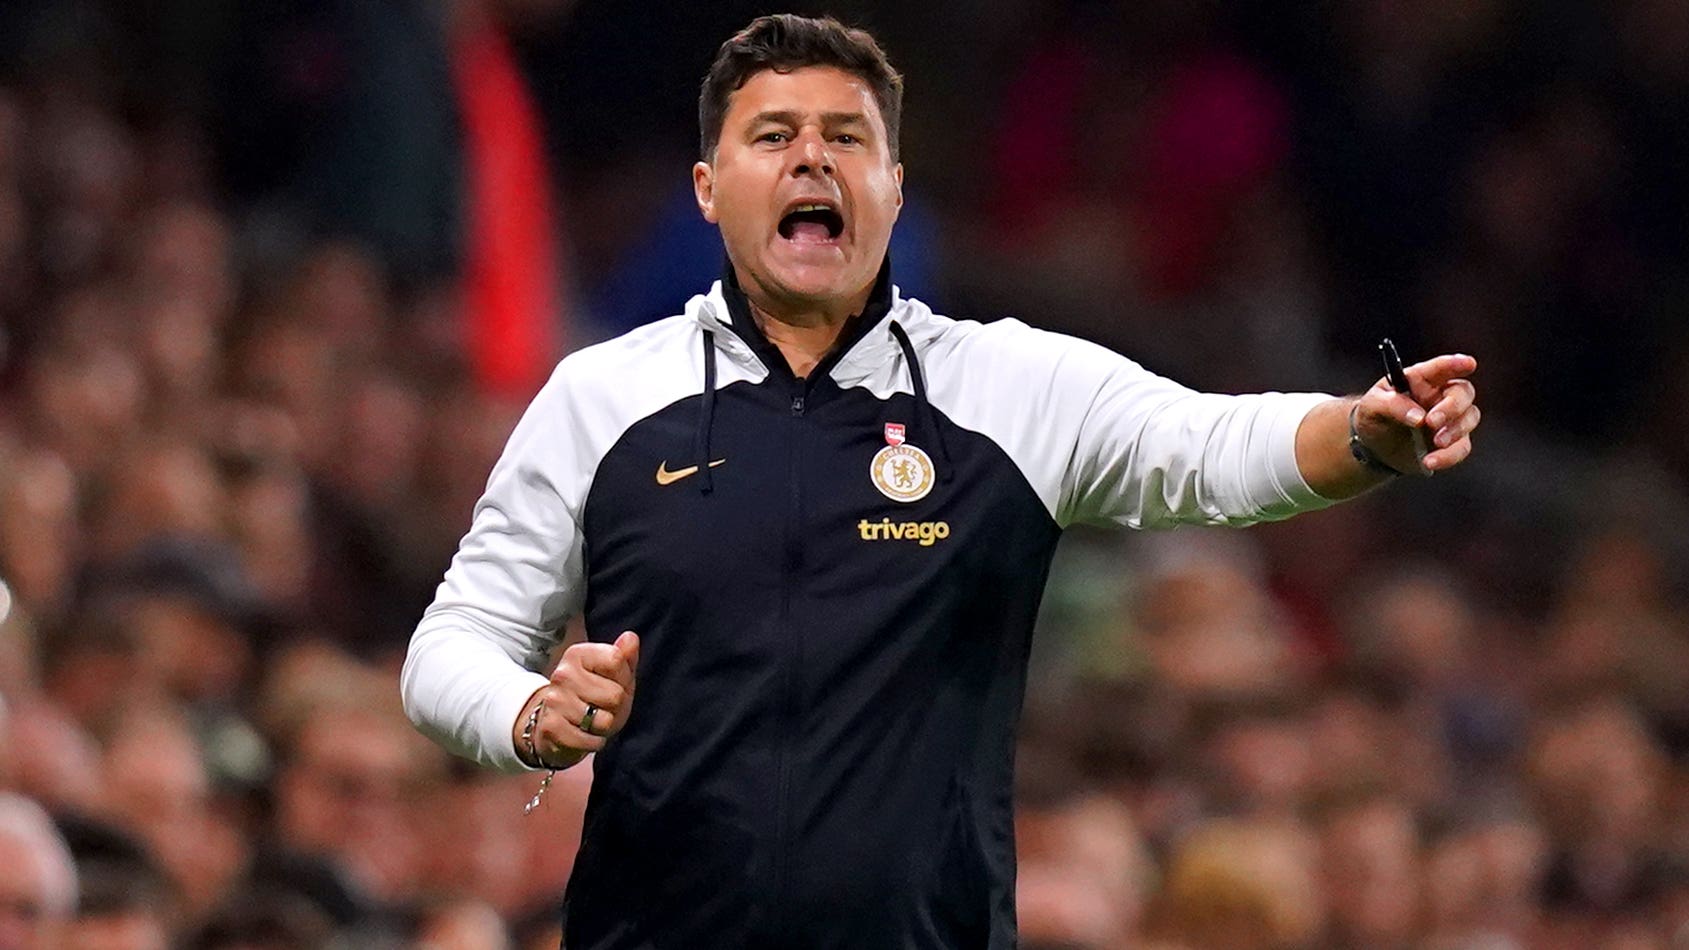 Mauricio Pochettino wants Chelsea fans to ‘believe and show trust’ in his side